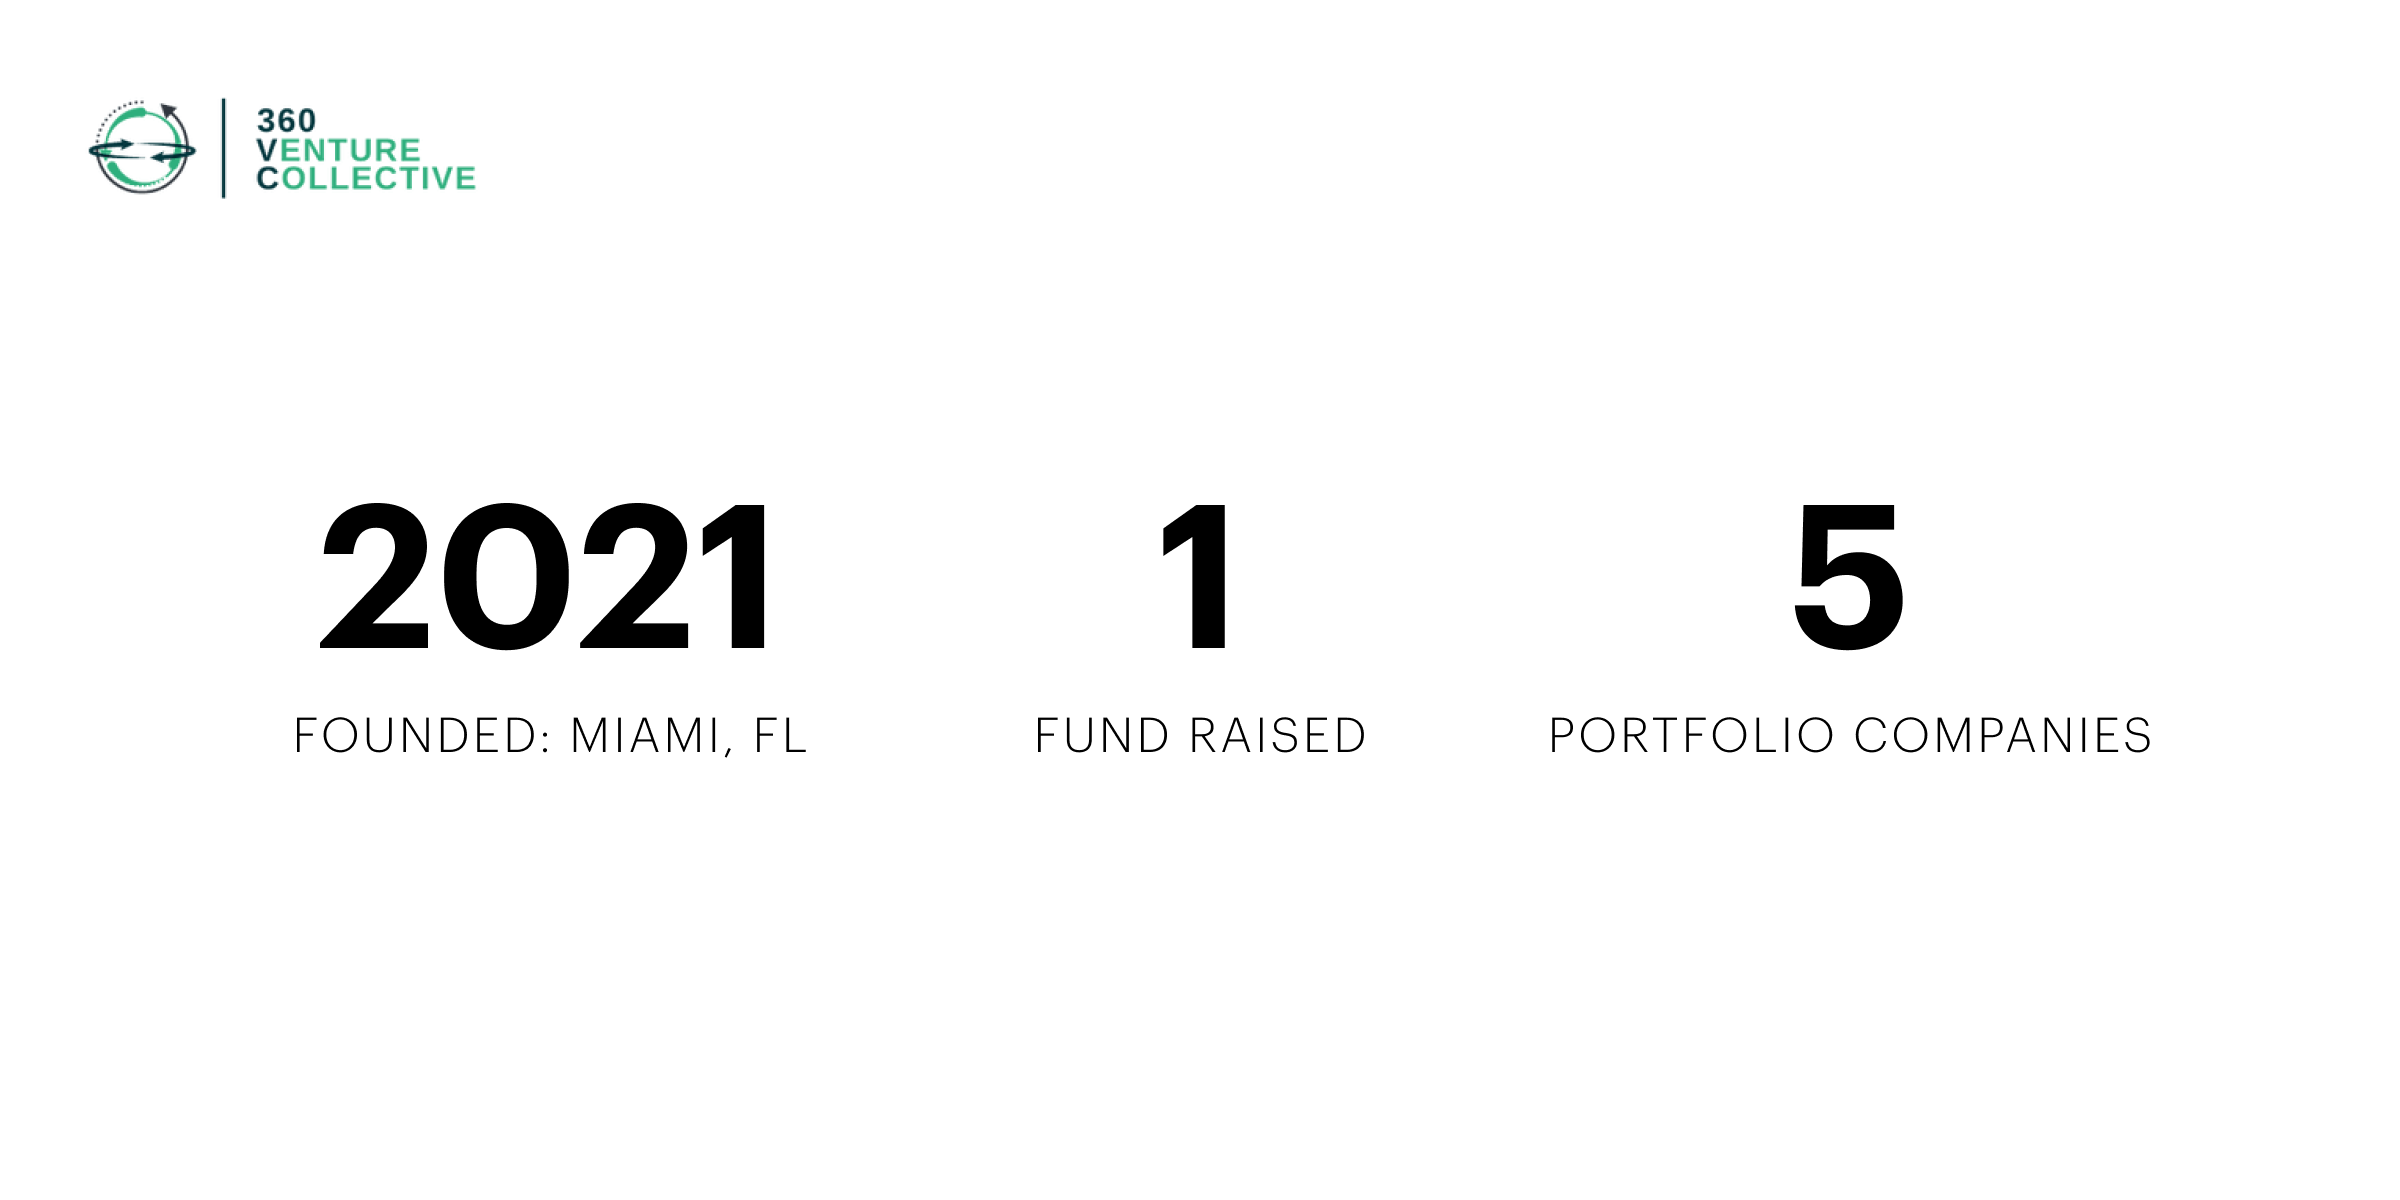 360 Venture Collective Founded 2021 Miami